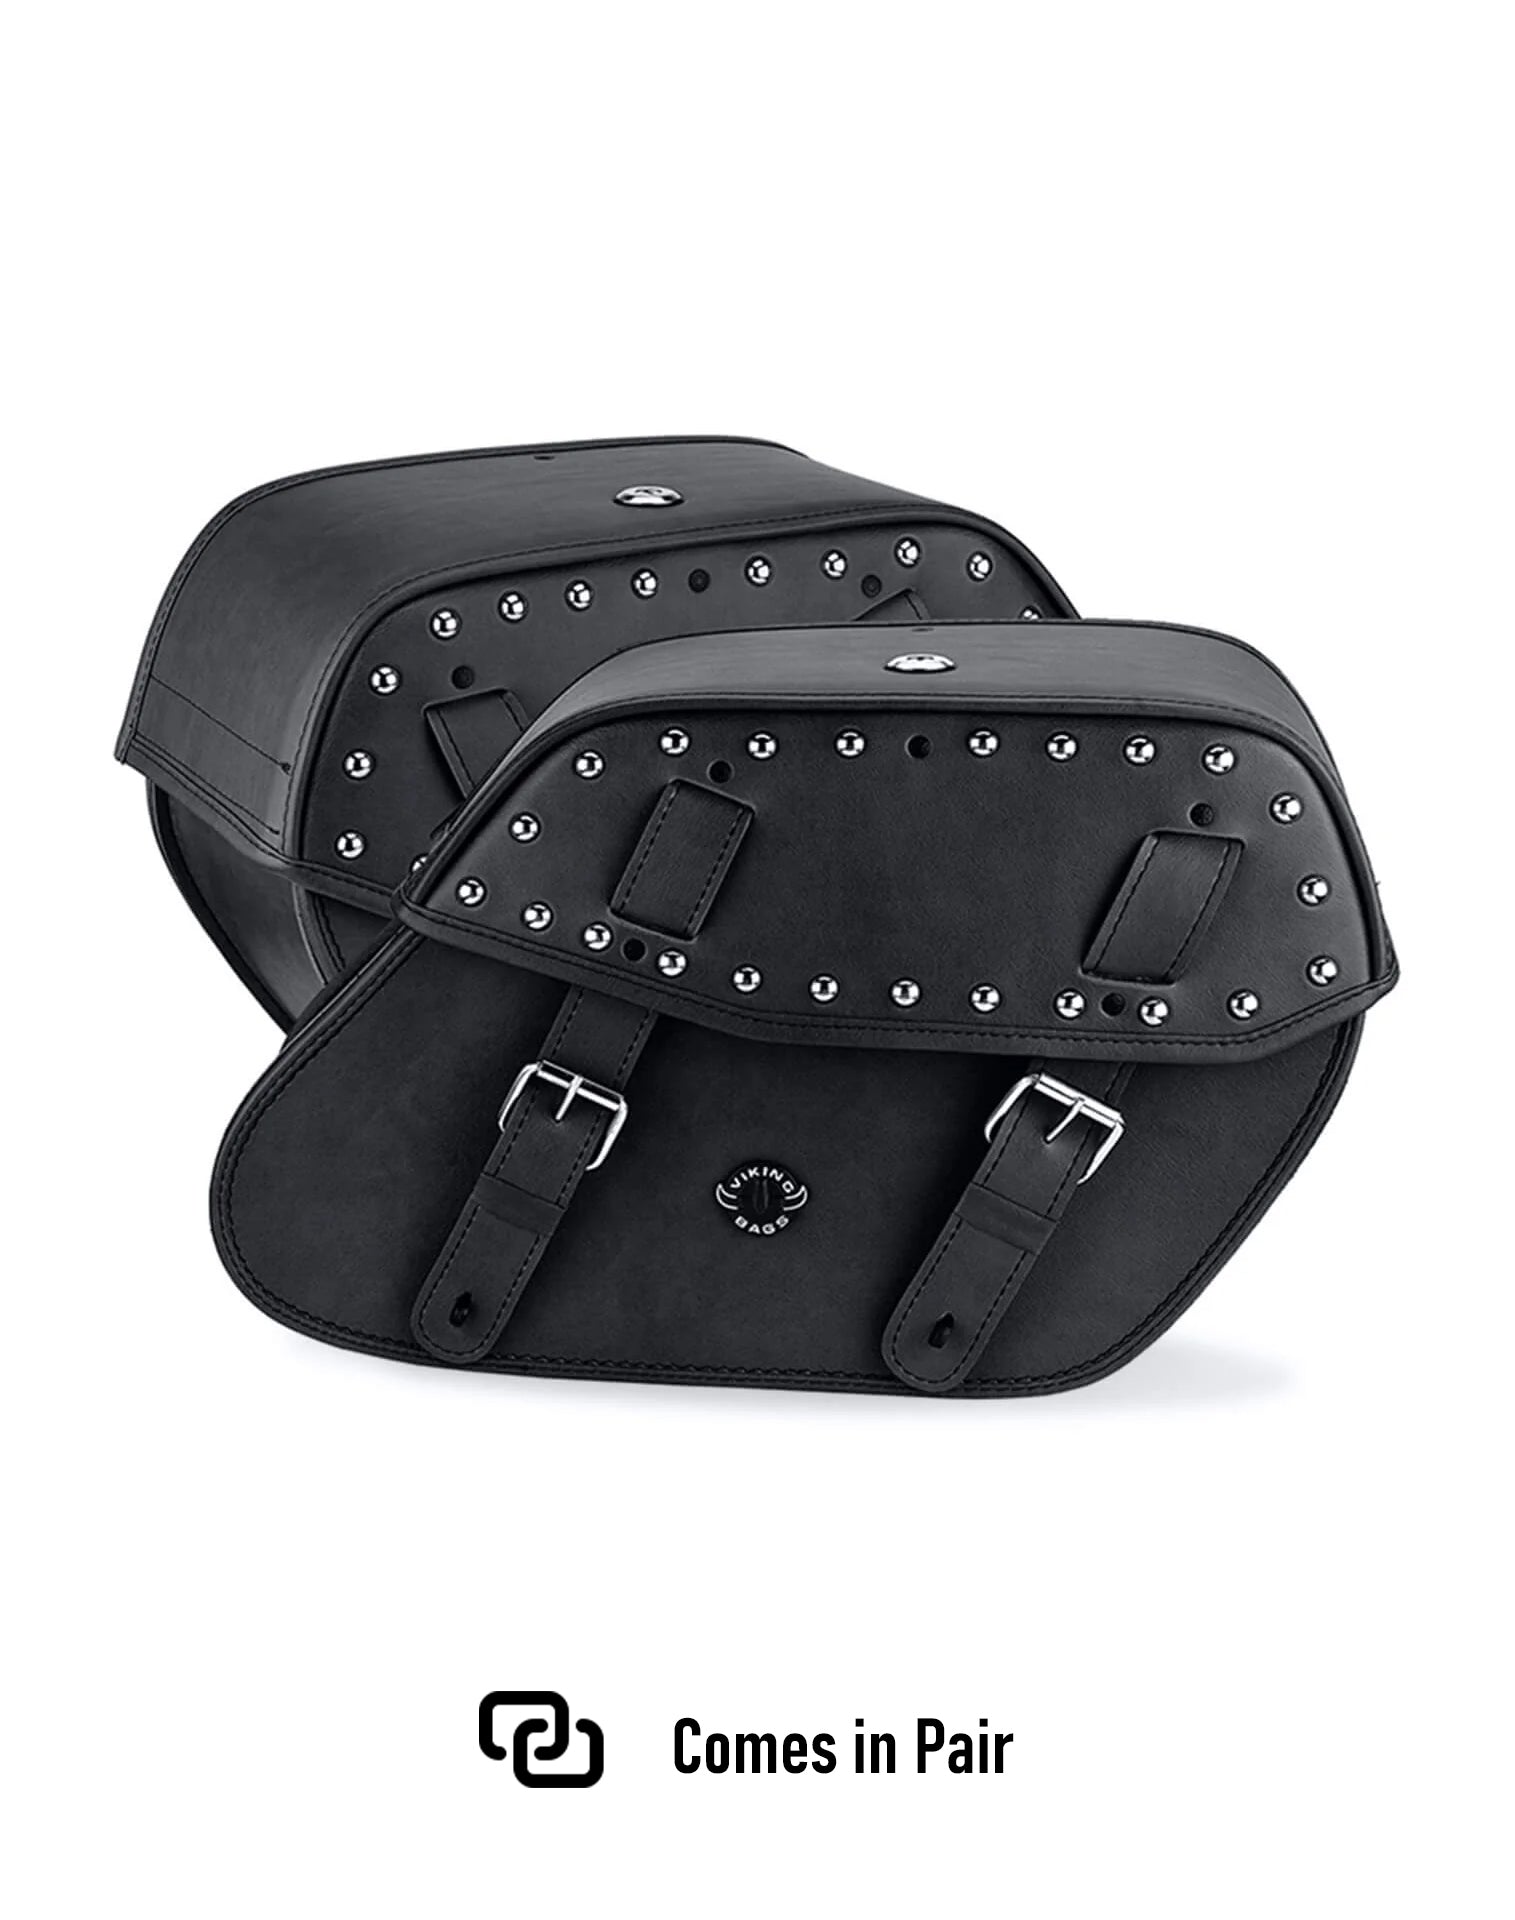 Viking Odin Large Yamaha V Star 1300 Tourer Studded Leather Motorcycle Saddlebags Weather Resistant Bags Comes in Pair